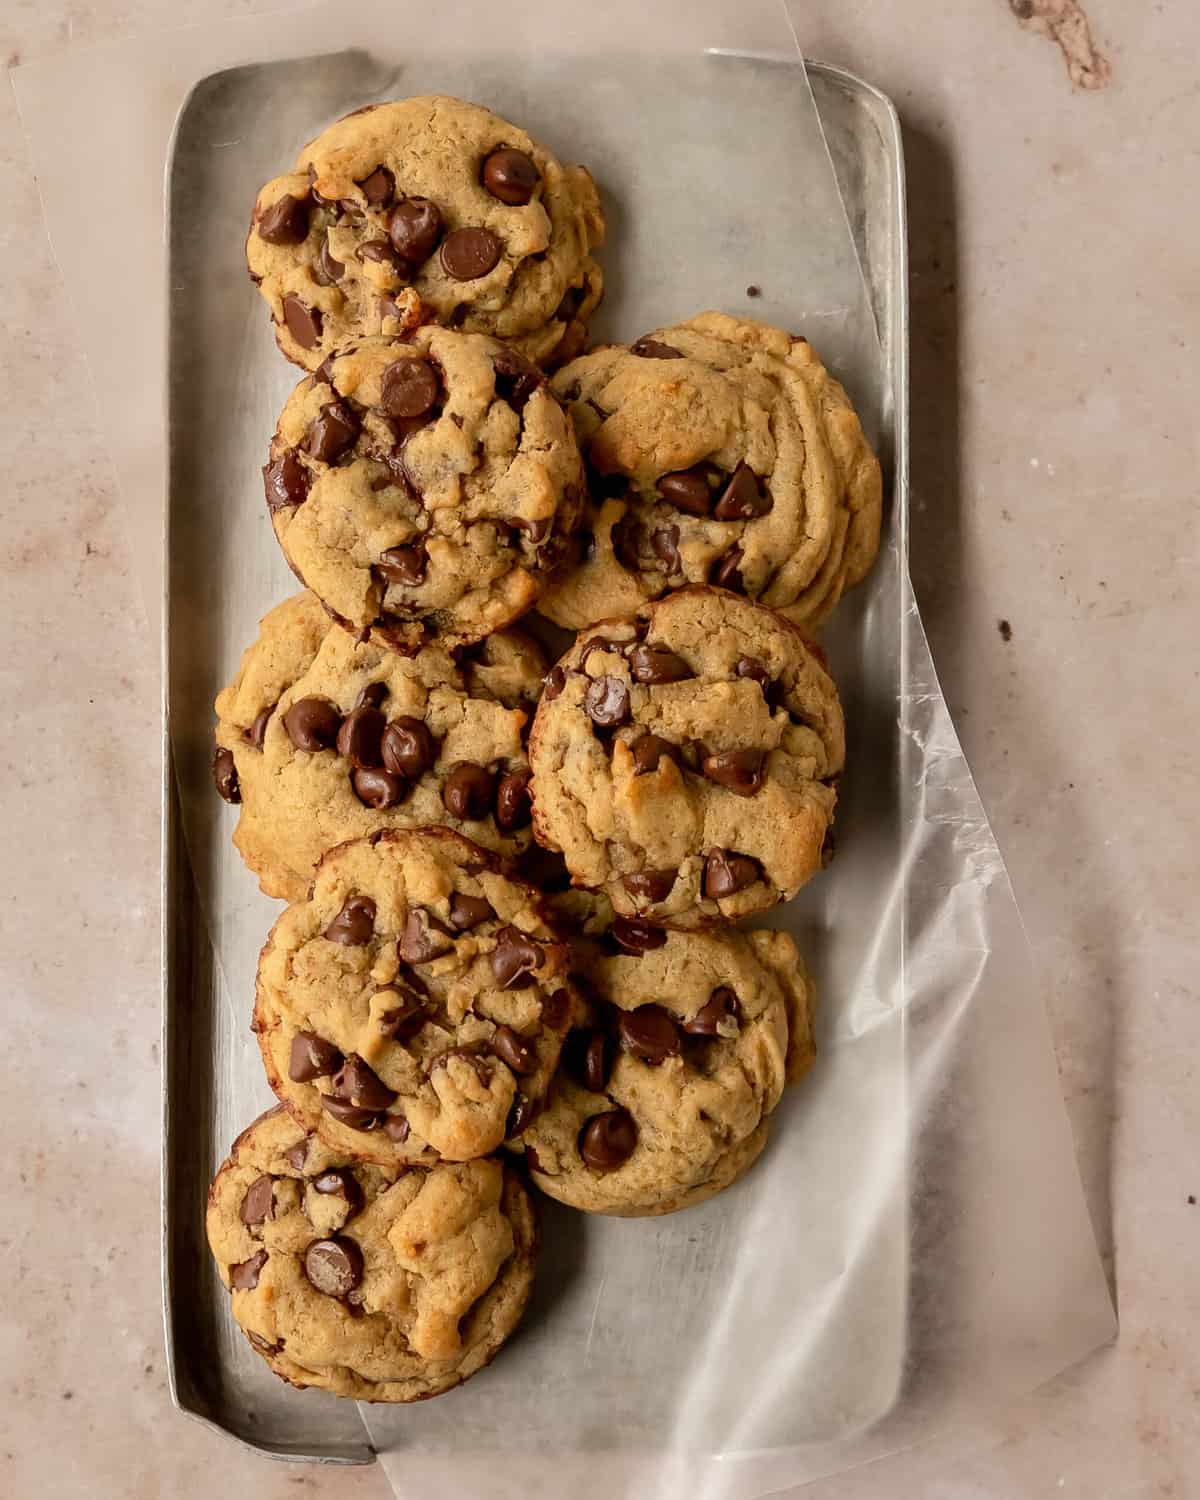 https://olivesnthyme.com/wp-content/uploads/2022/12/Small-Batch-Chocolate-Chip-Cookies-8-scaled.jpg